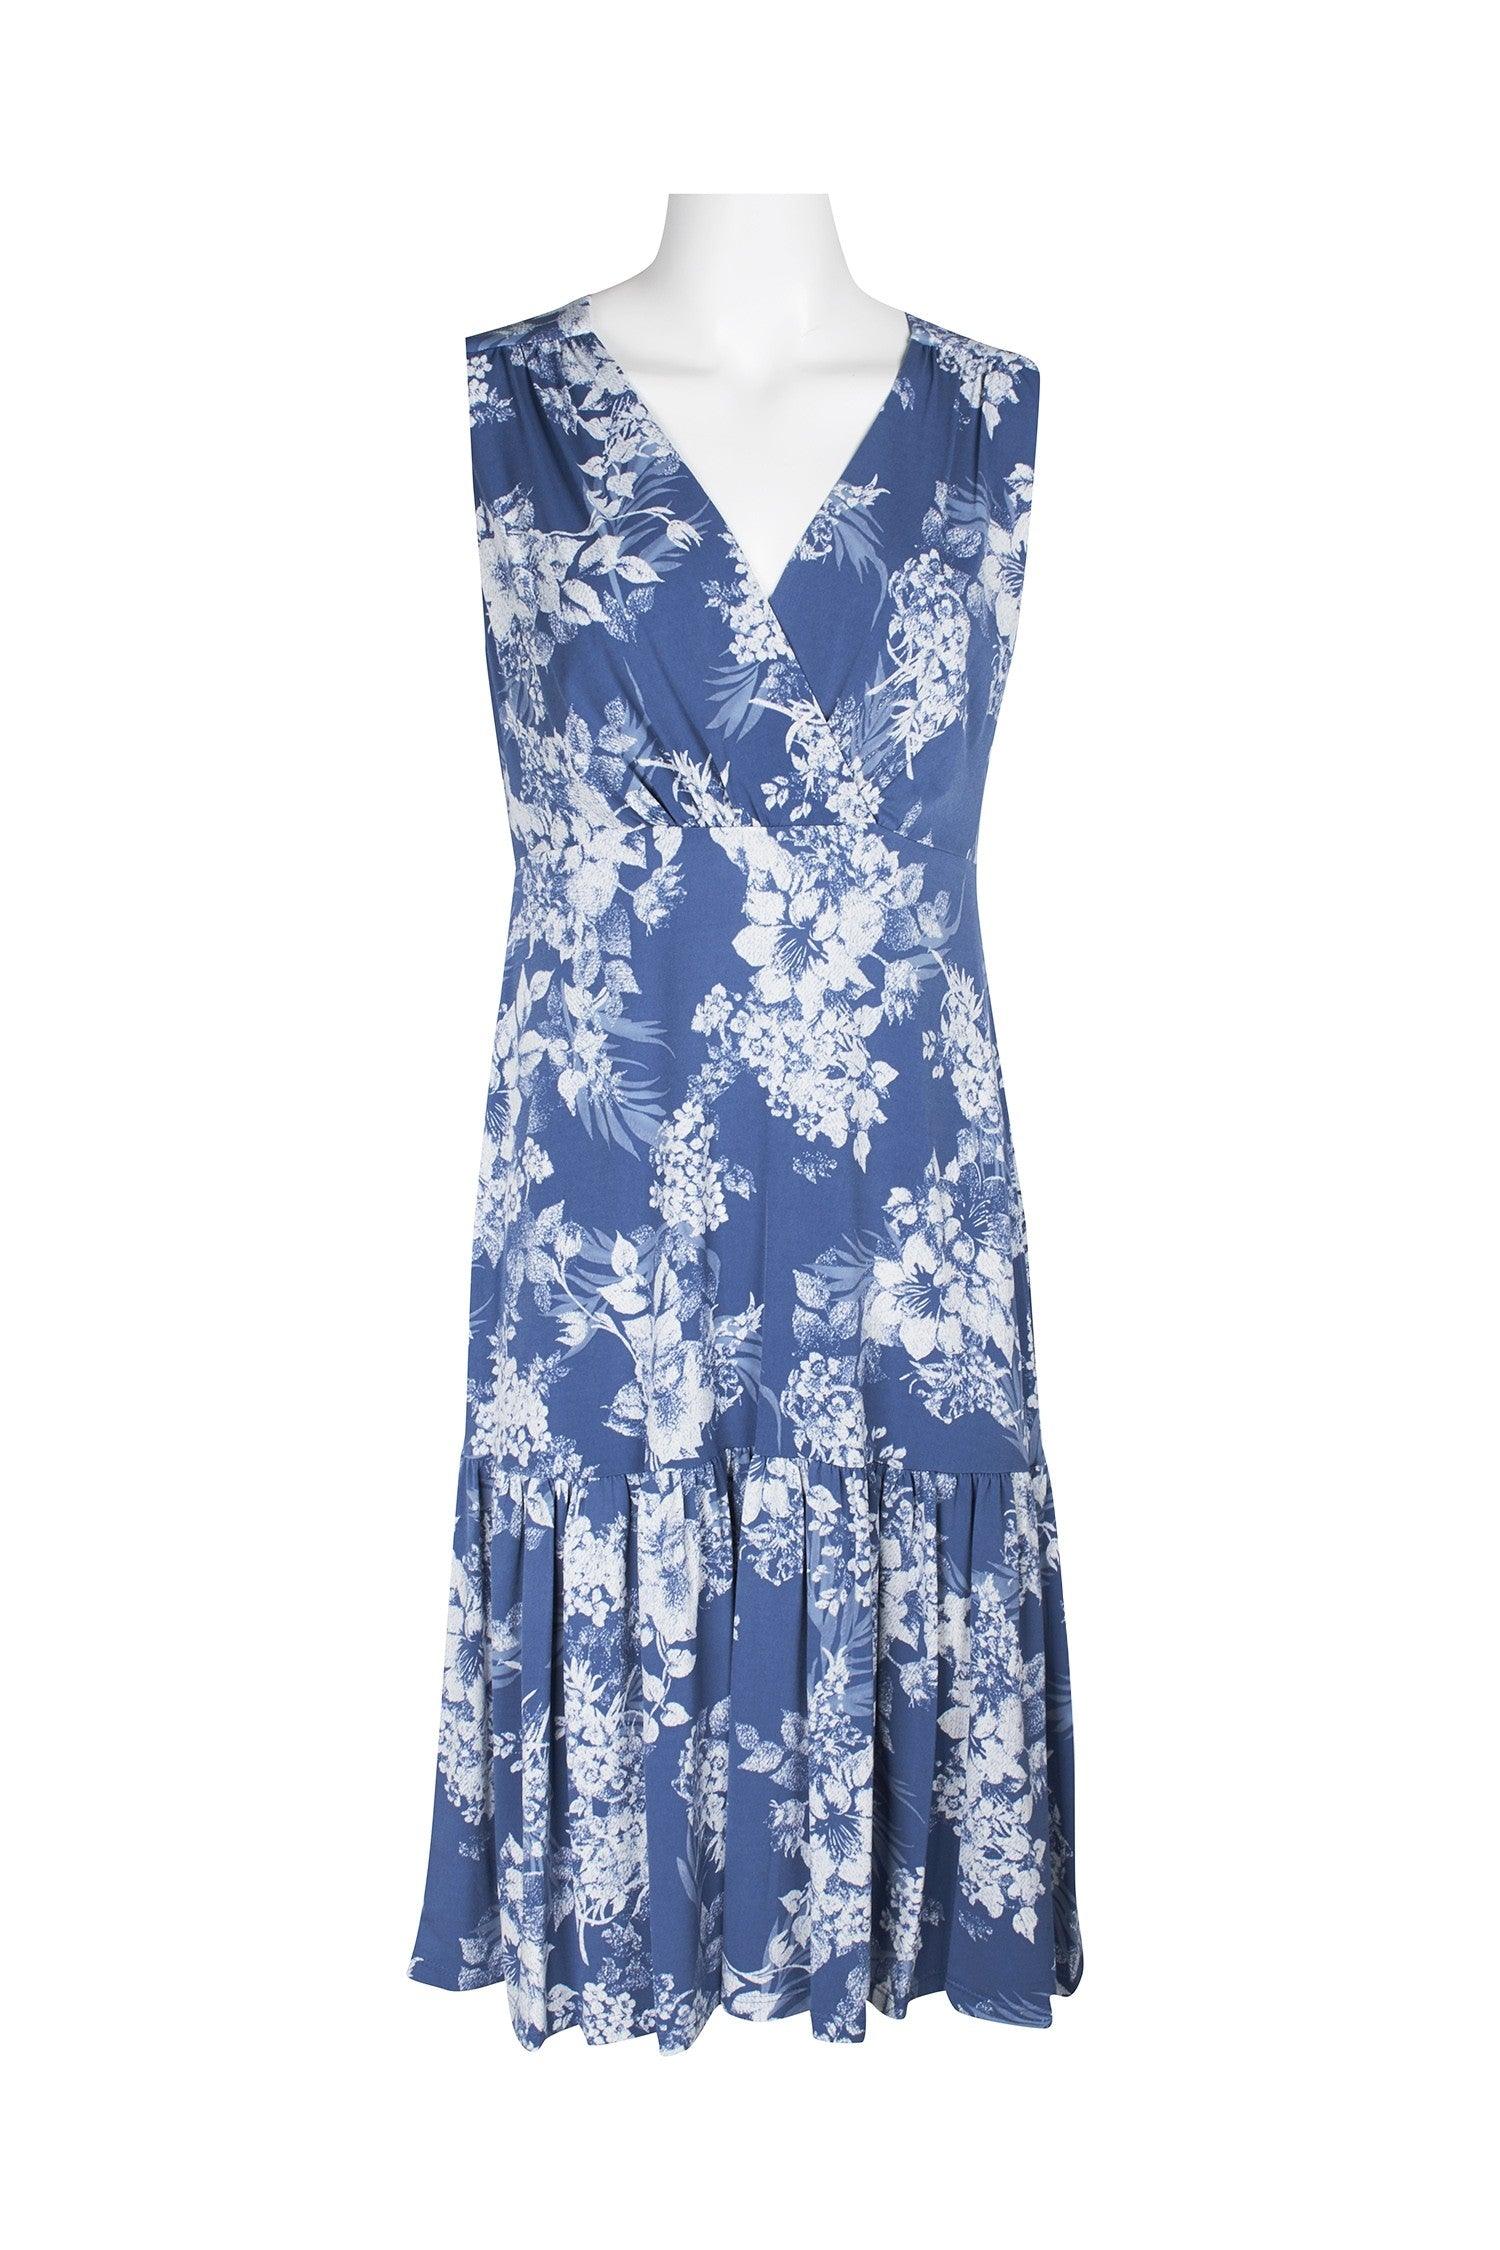 Connected Apparel Sleeveless Short Floral Dress - The Dress Outlet